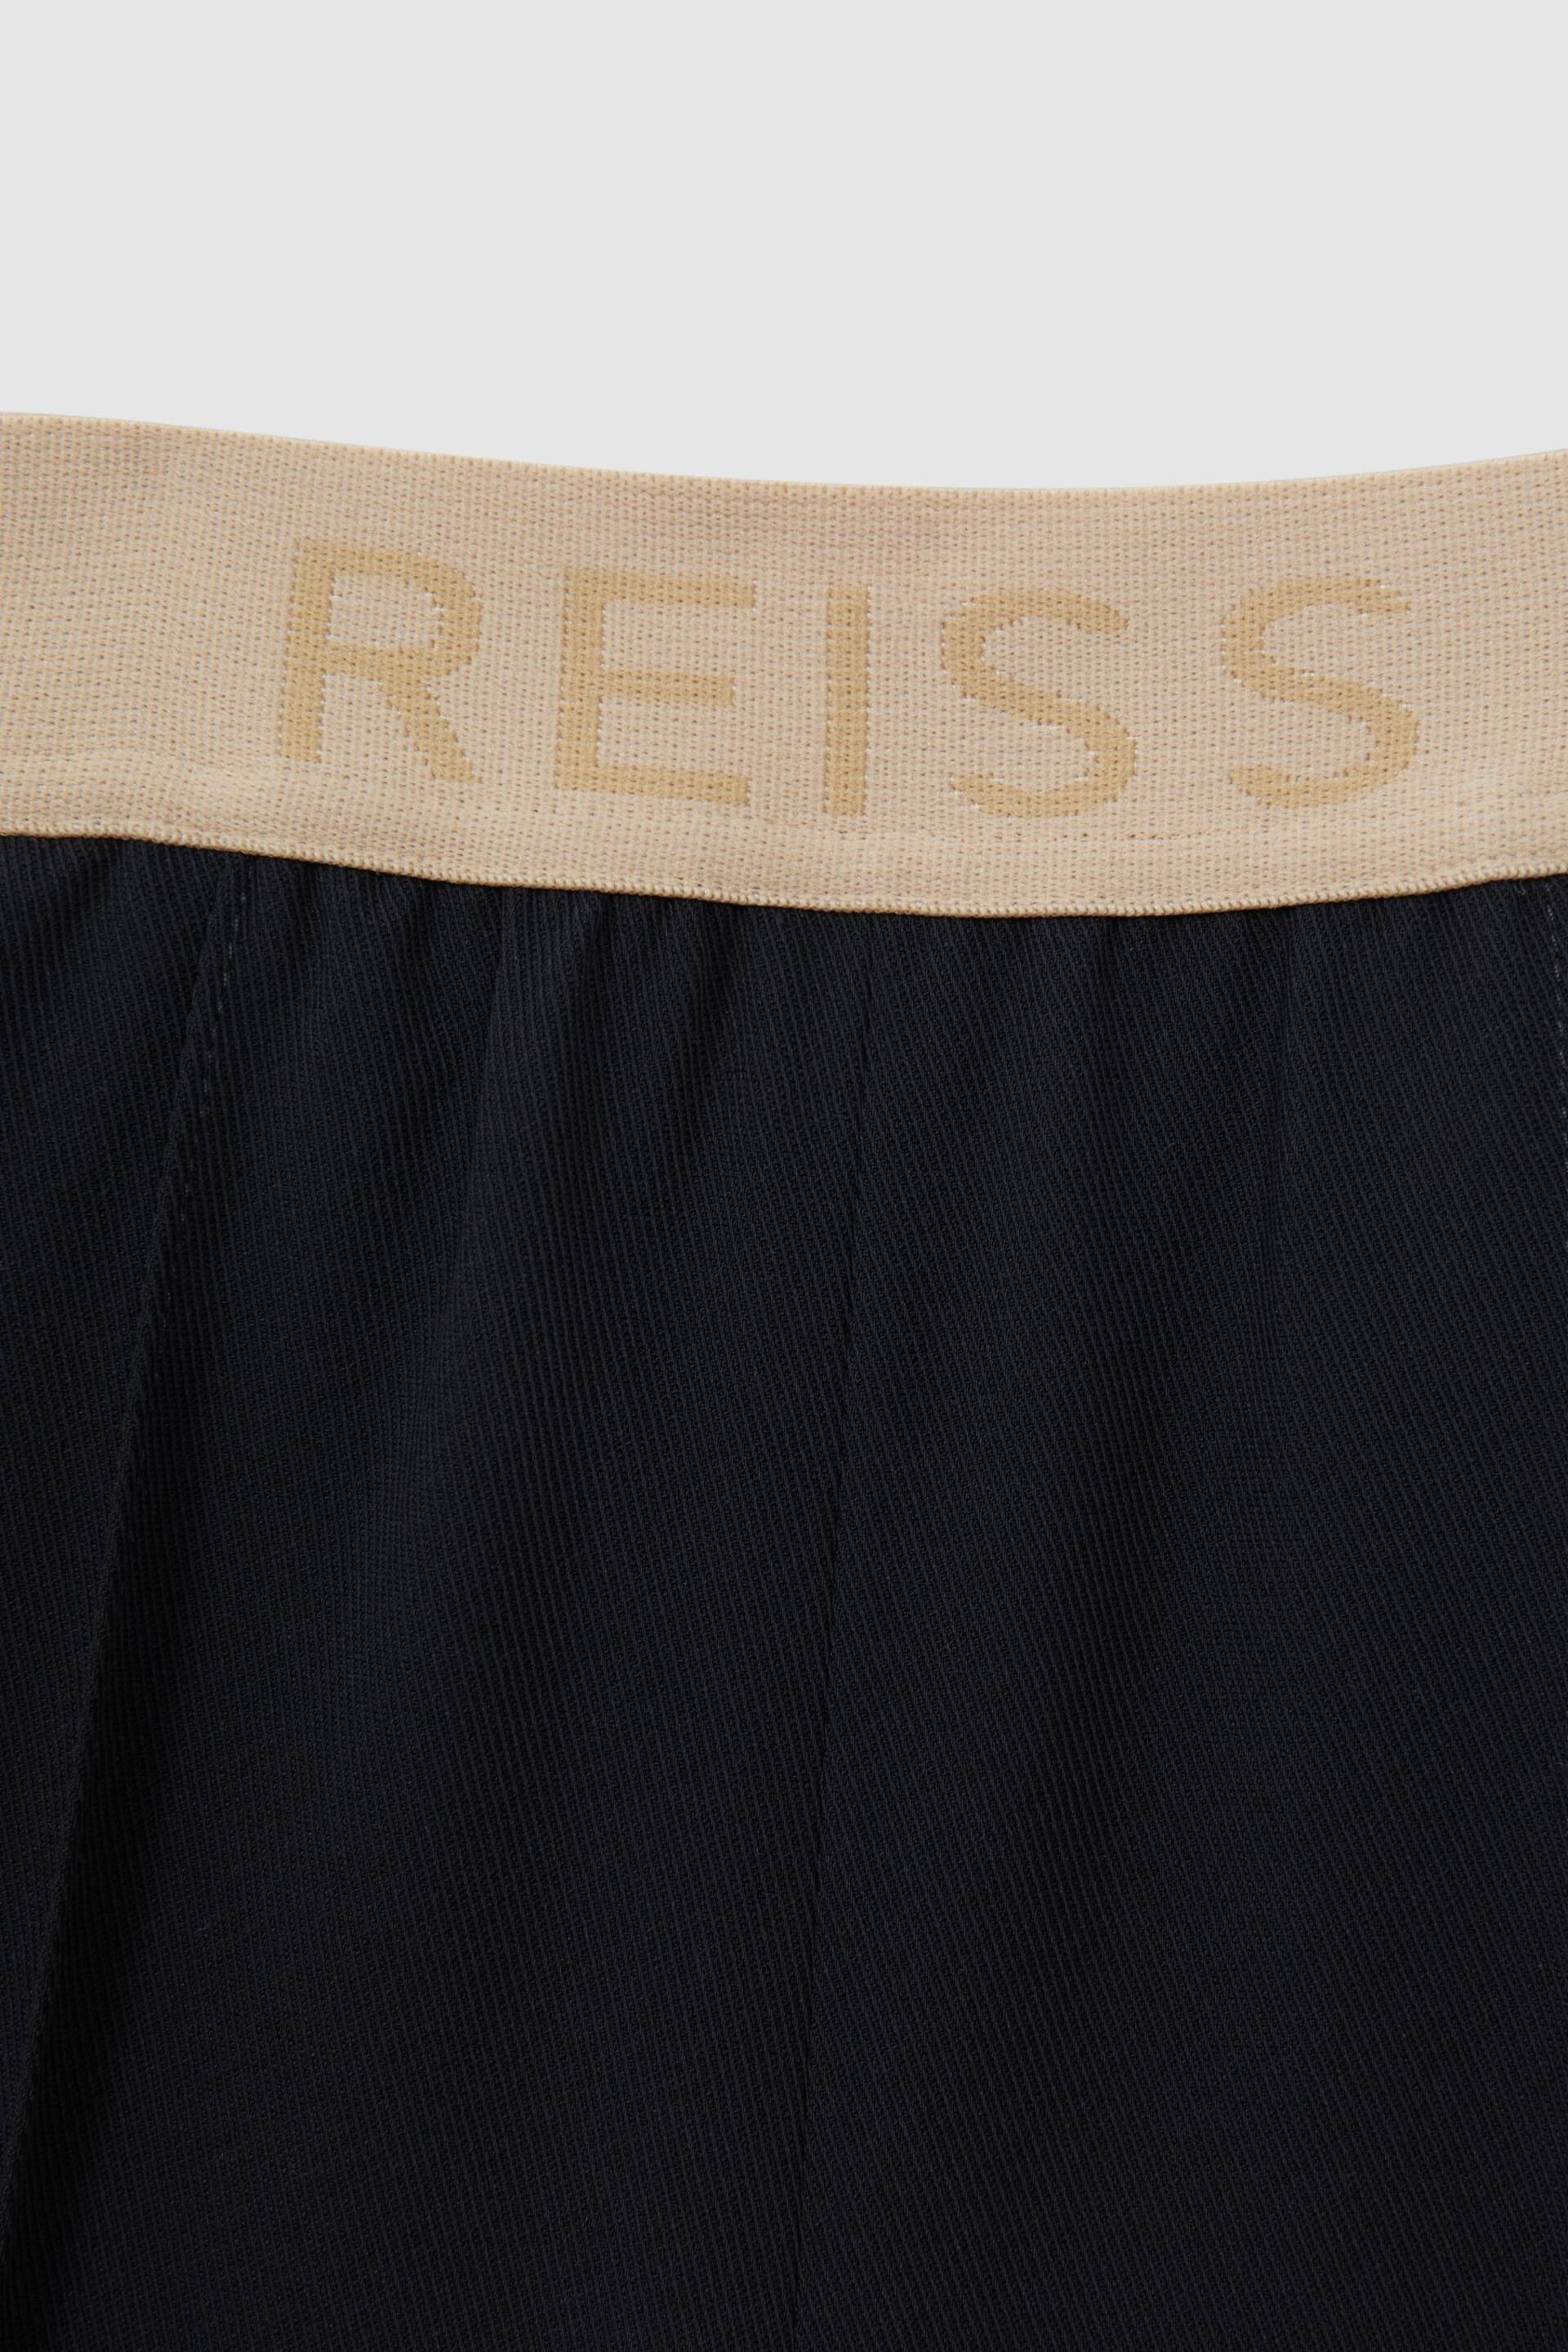 Reiss Navy Ayana Junior Elasticated Wide Leg Trousers - Image 6 of 6